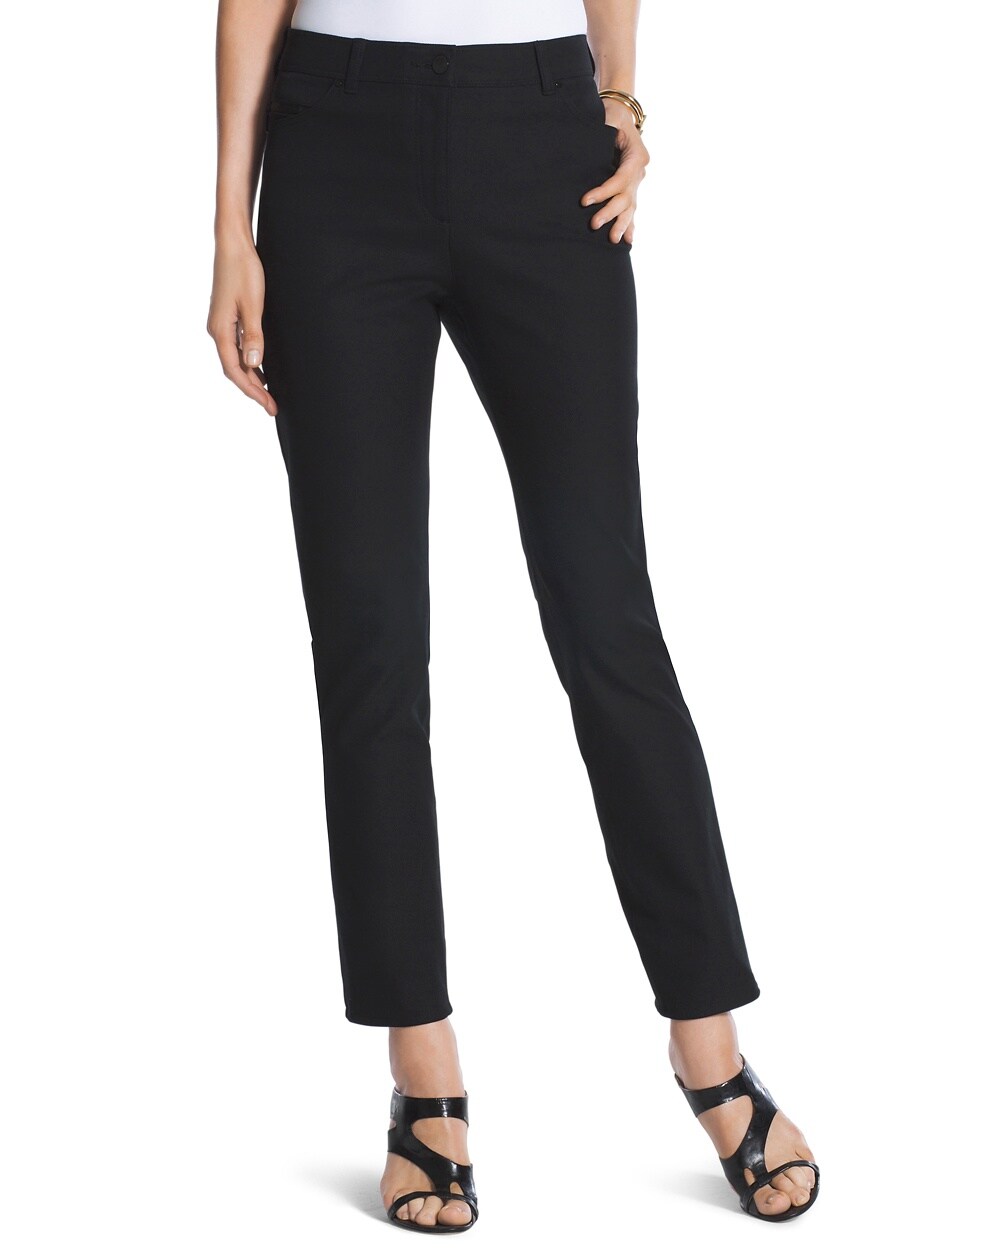 So Slimming Courtney Ankle Pants - Chico's